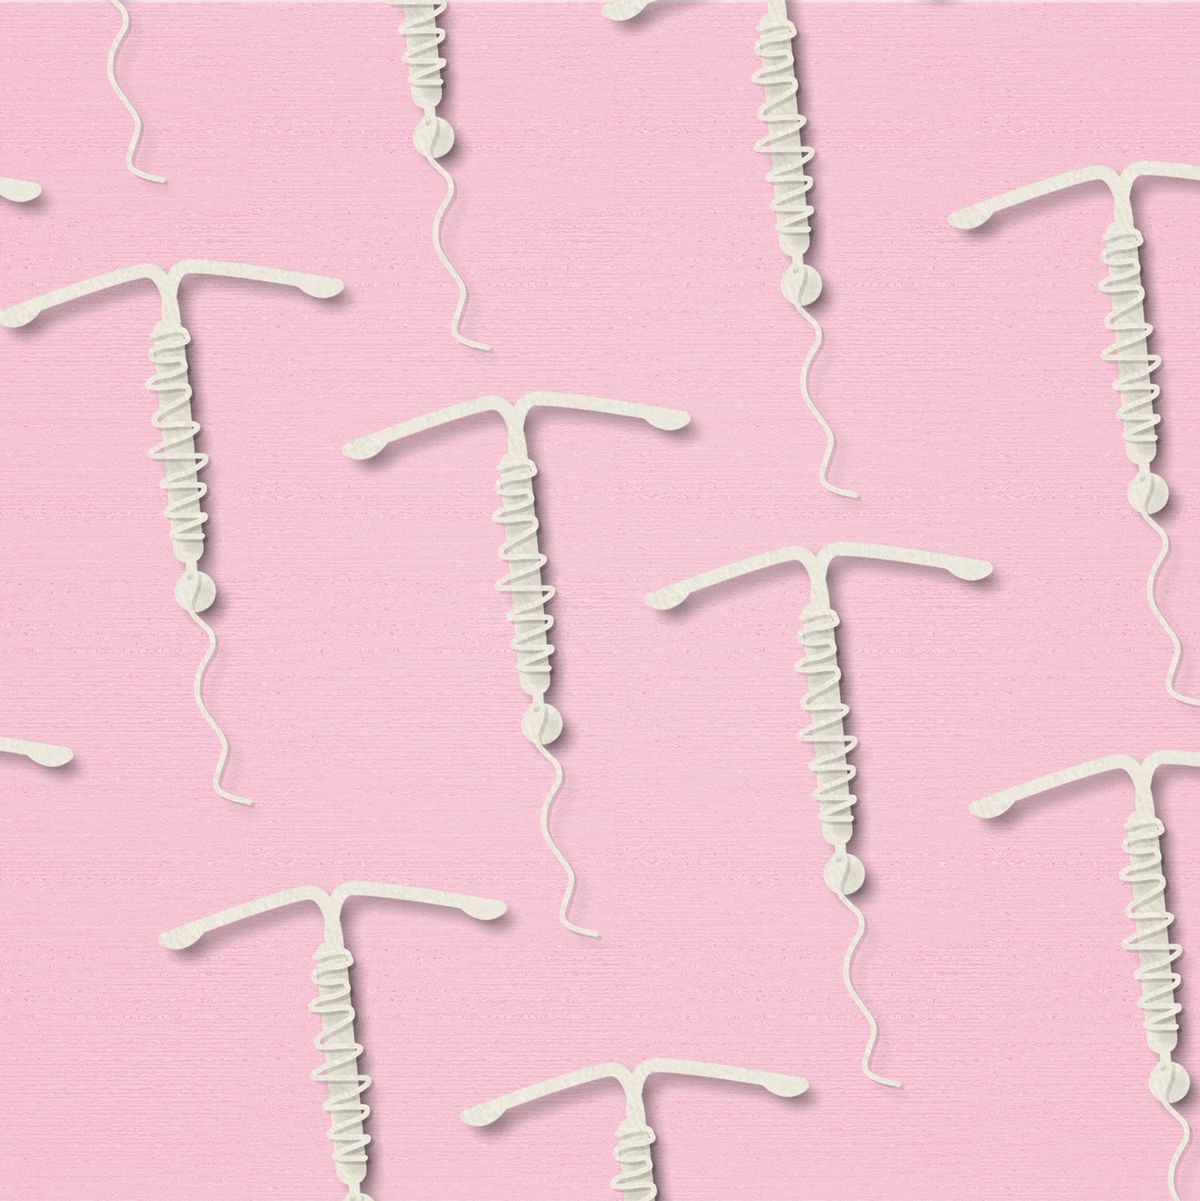 iud concept hormonal contraception  on a pink background